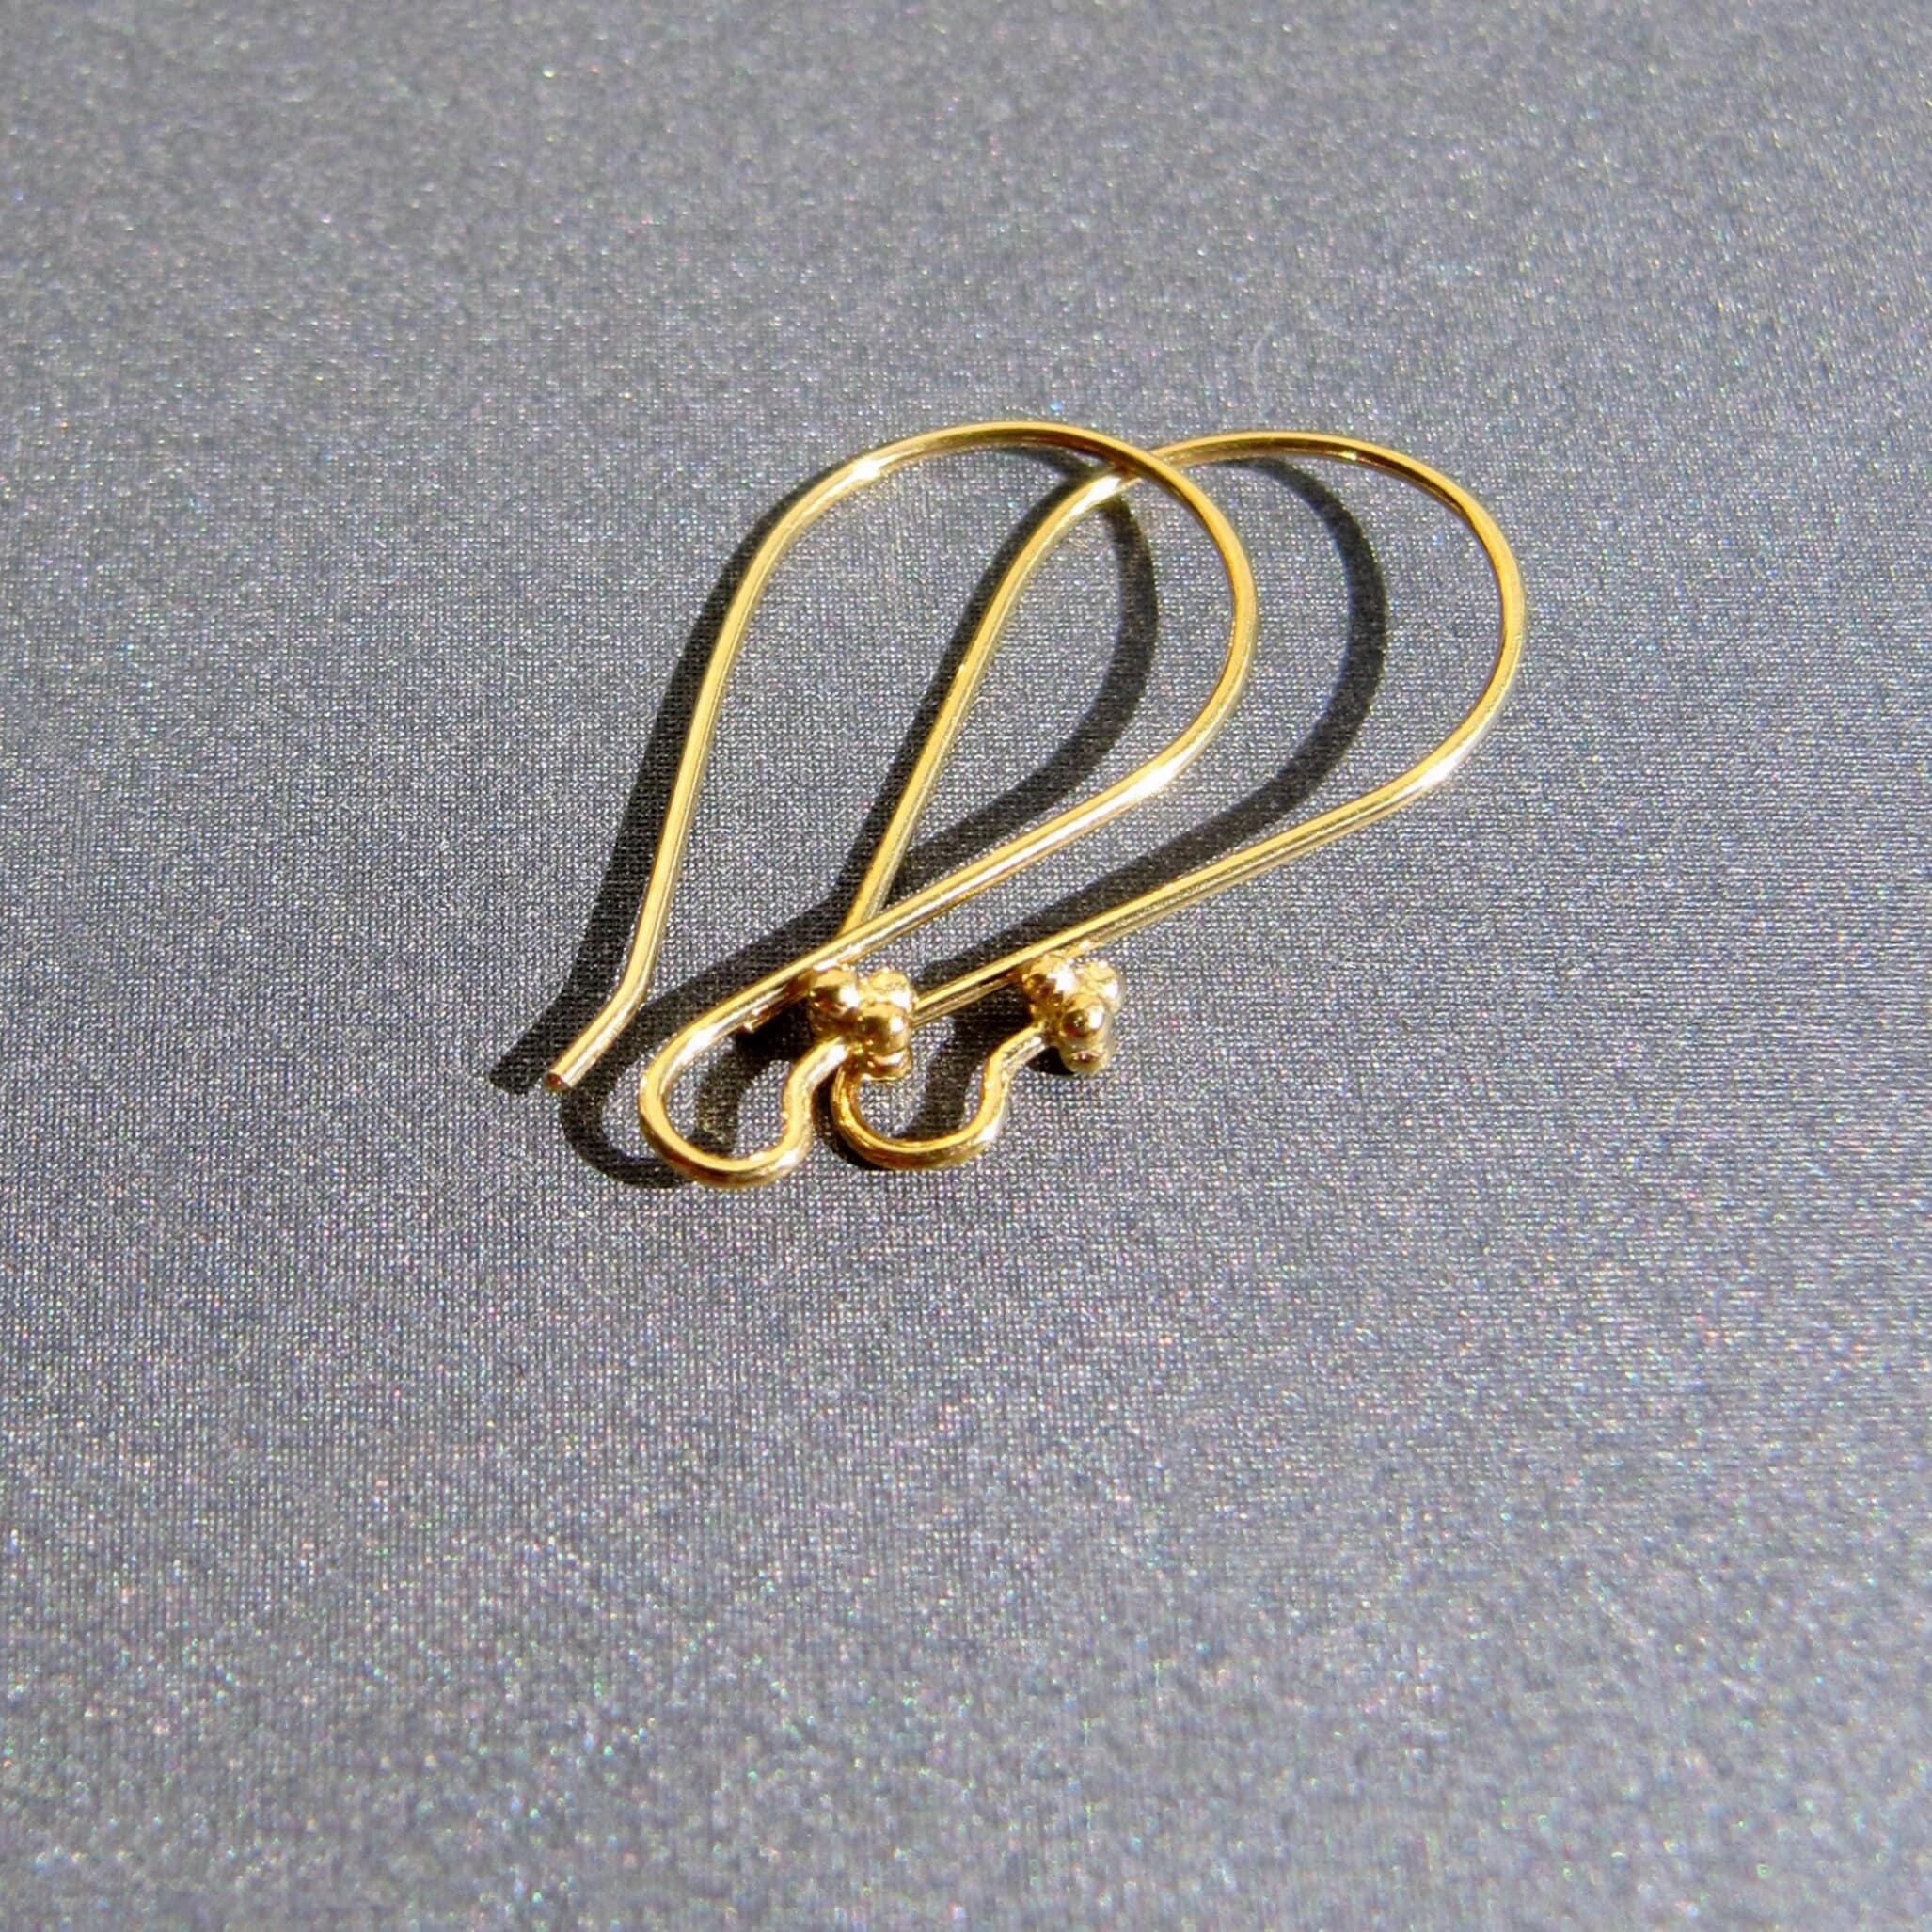 Gold Plated LEVERBACK Earrings, 17x9mm, Ear Wire Leverback